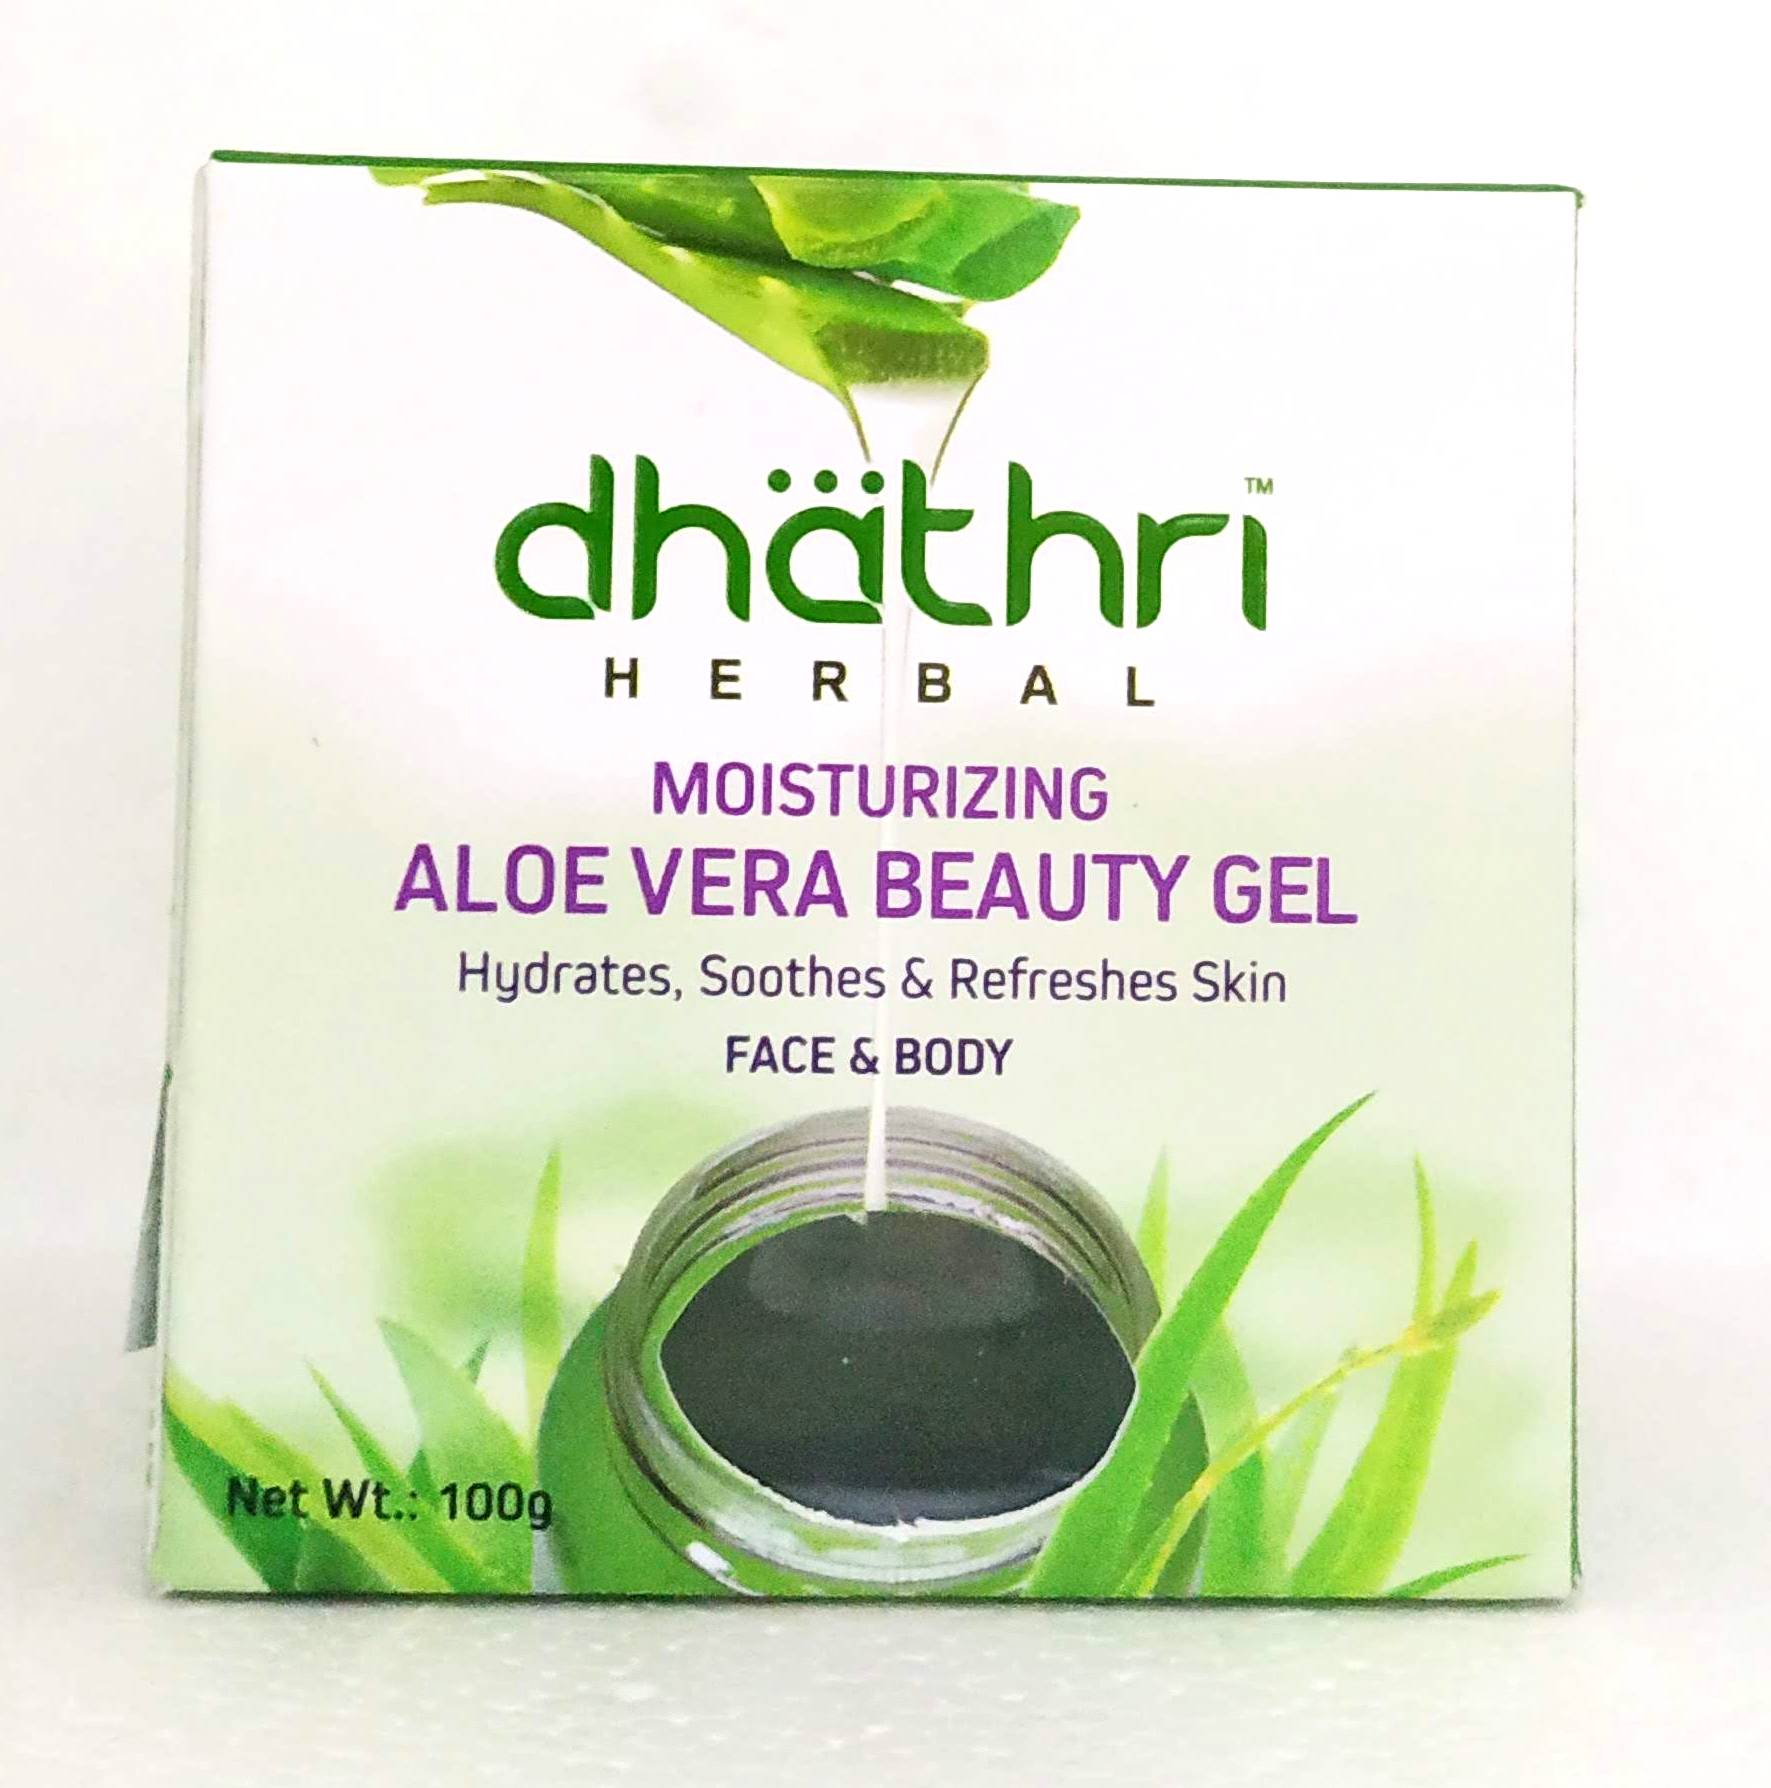 Shop Dhathri aloevera beauty gel 100gm at price 95.00 from Dhathri Online - Ayush Care